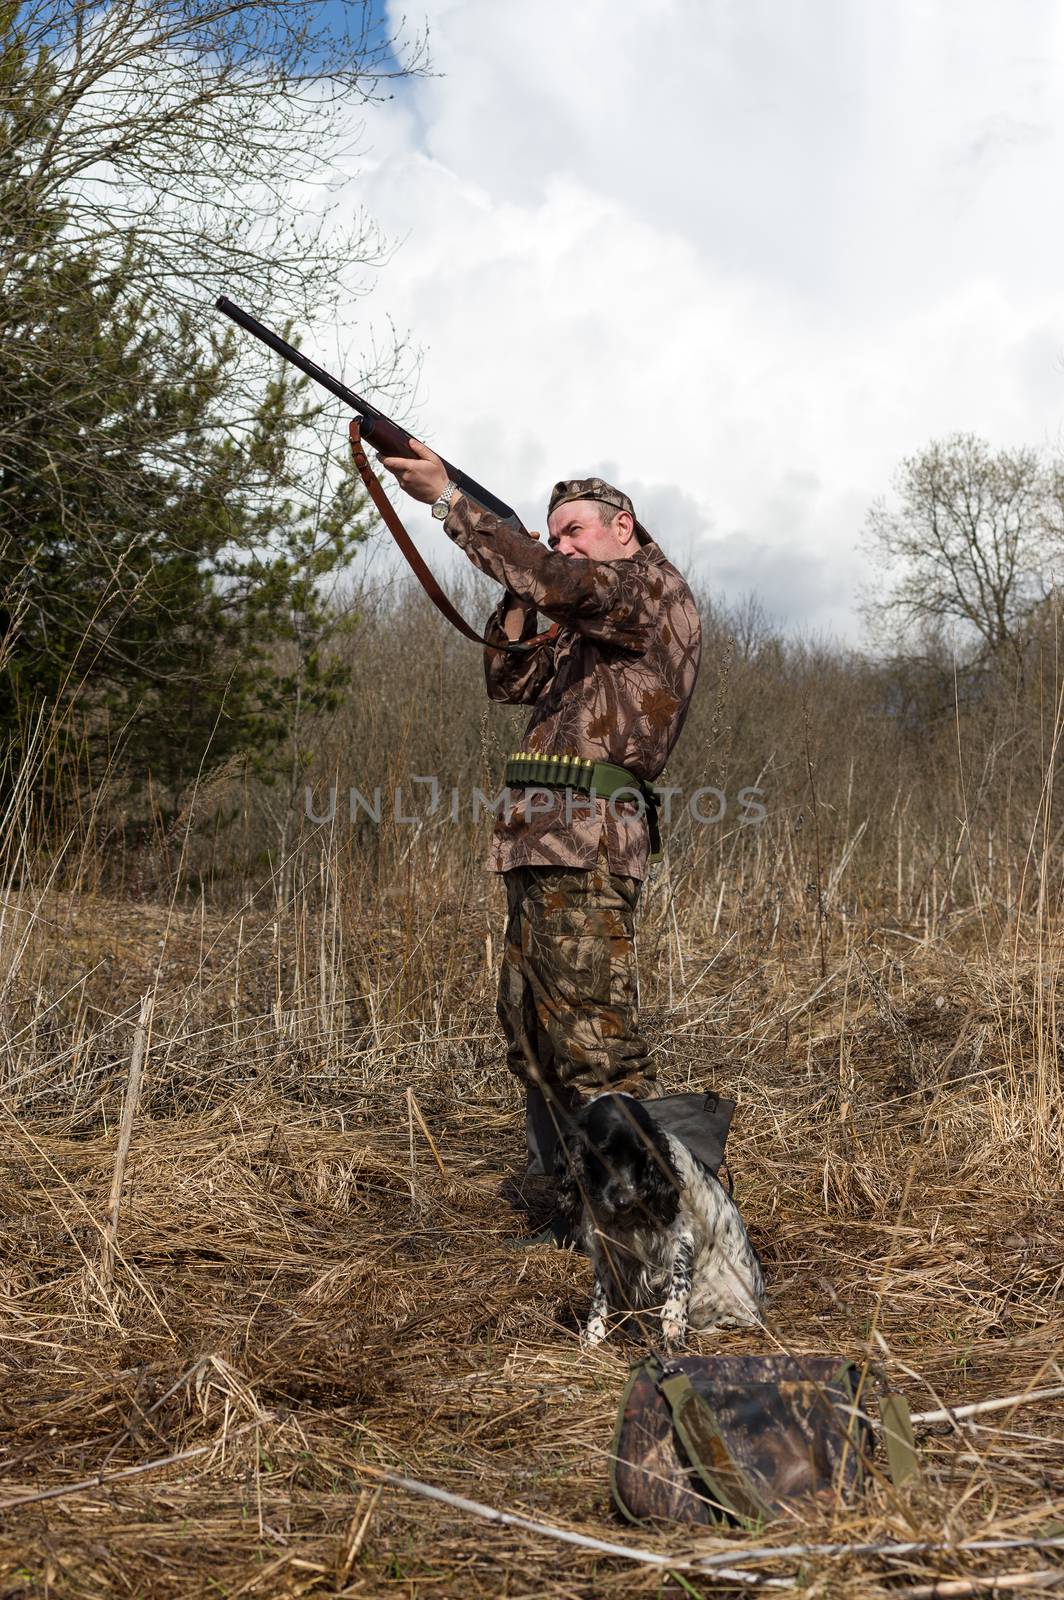 Outdoor shot of man with a gun and Russian hunting Spaniel.